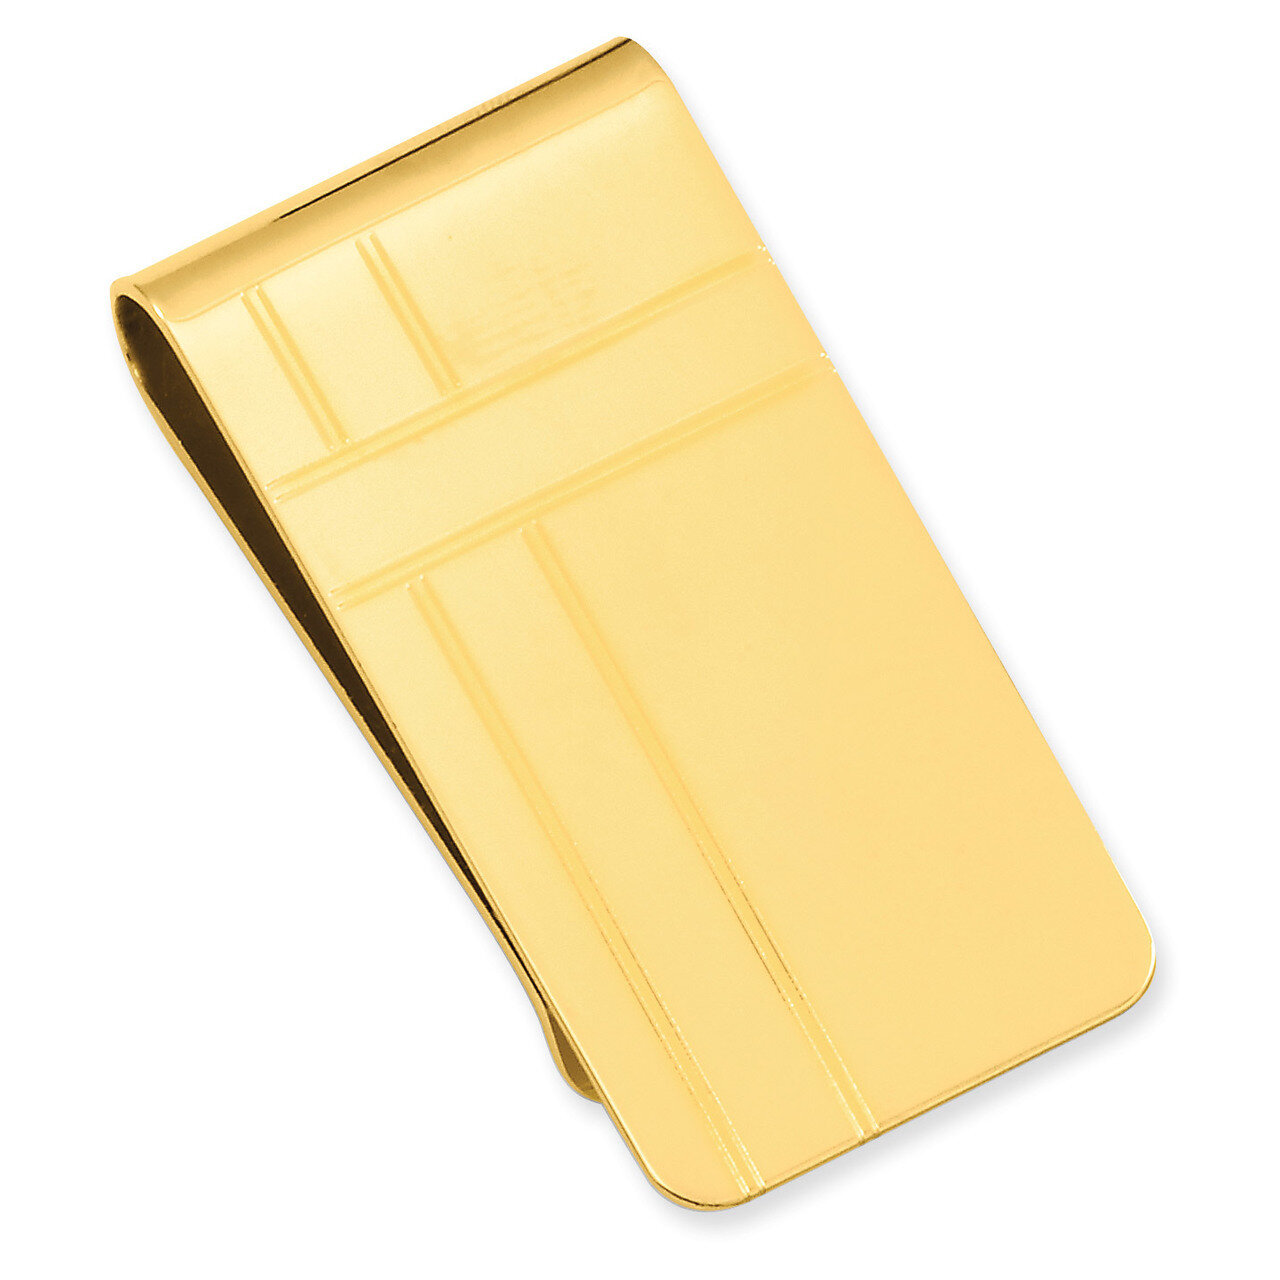 Crisss Cross Pattern Engravable Money Clip Gold-plated KW680